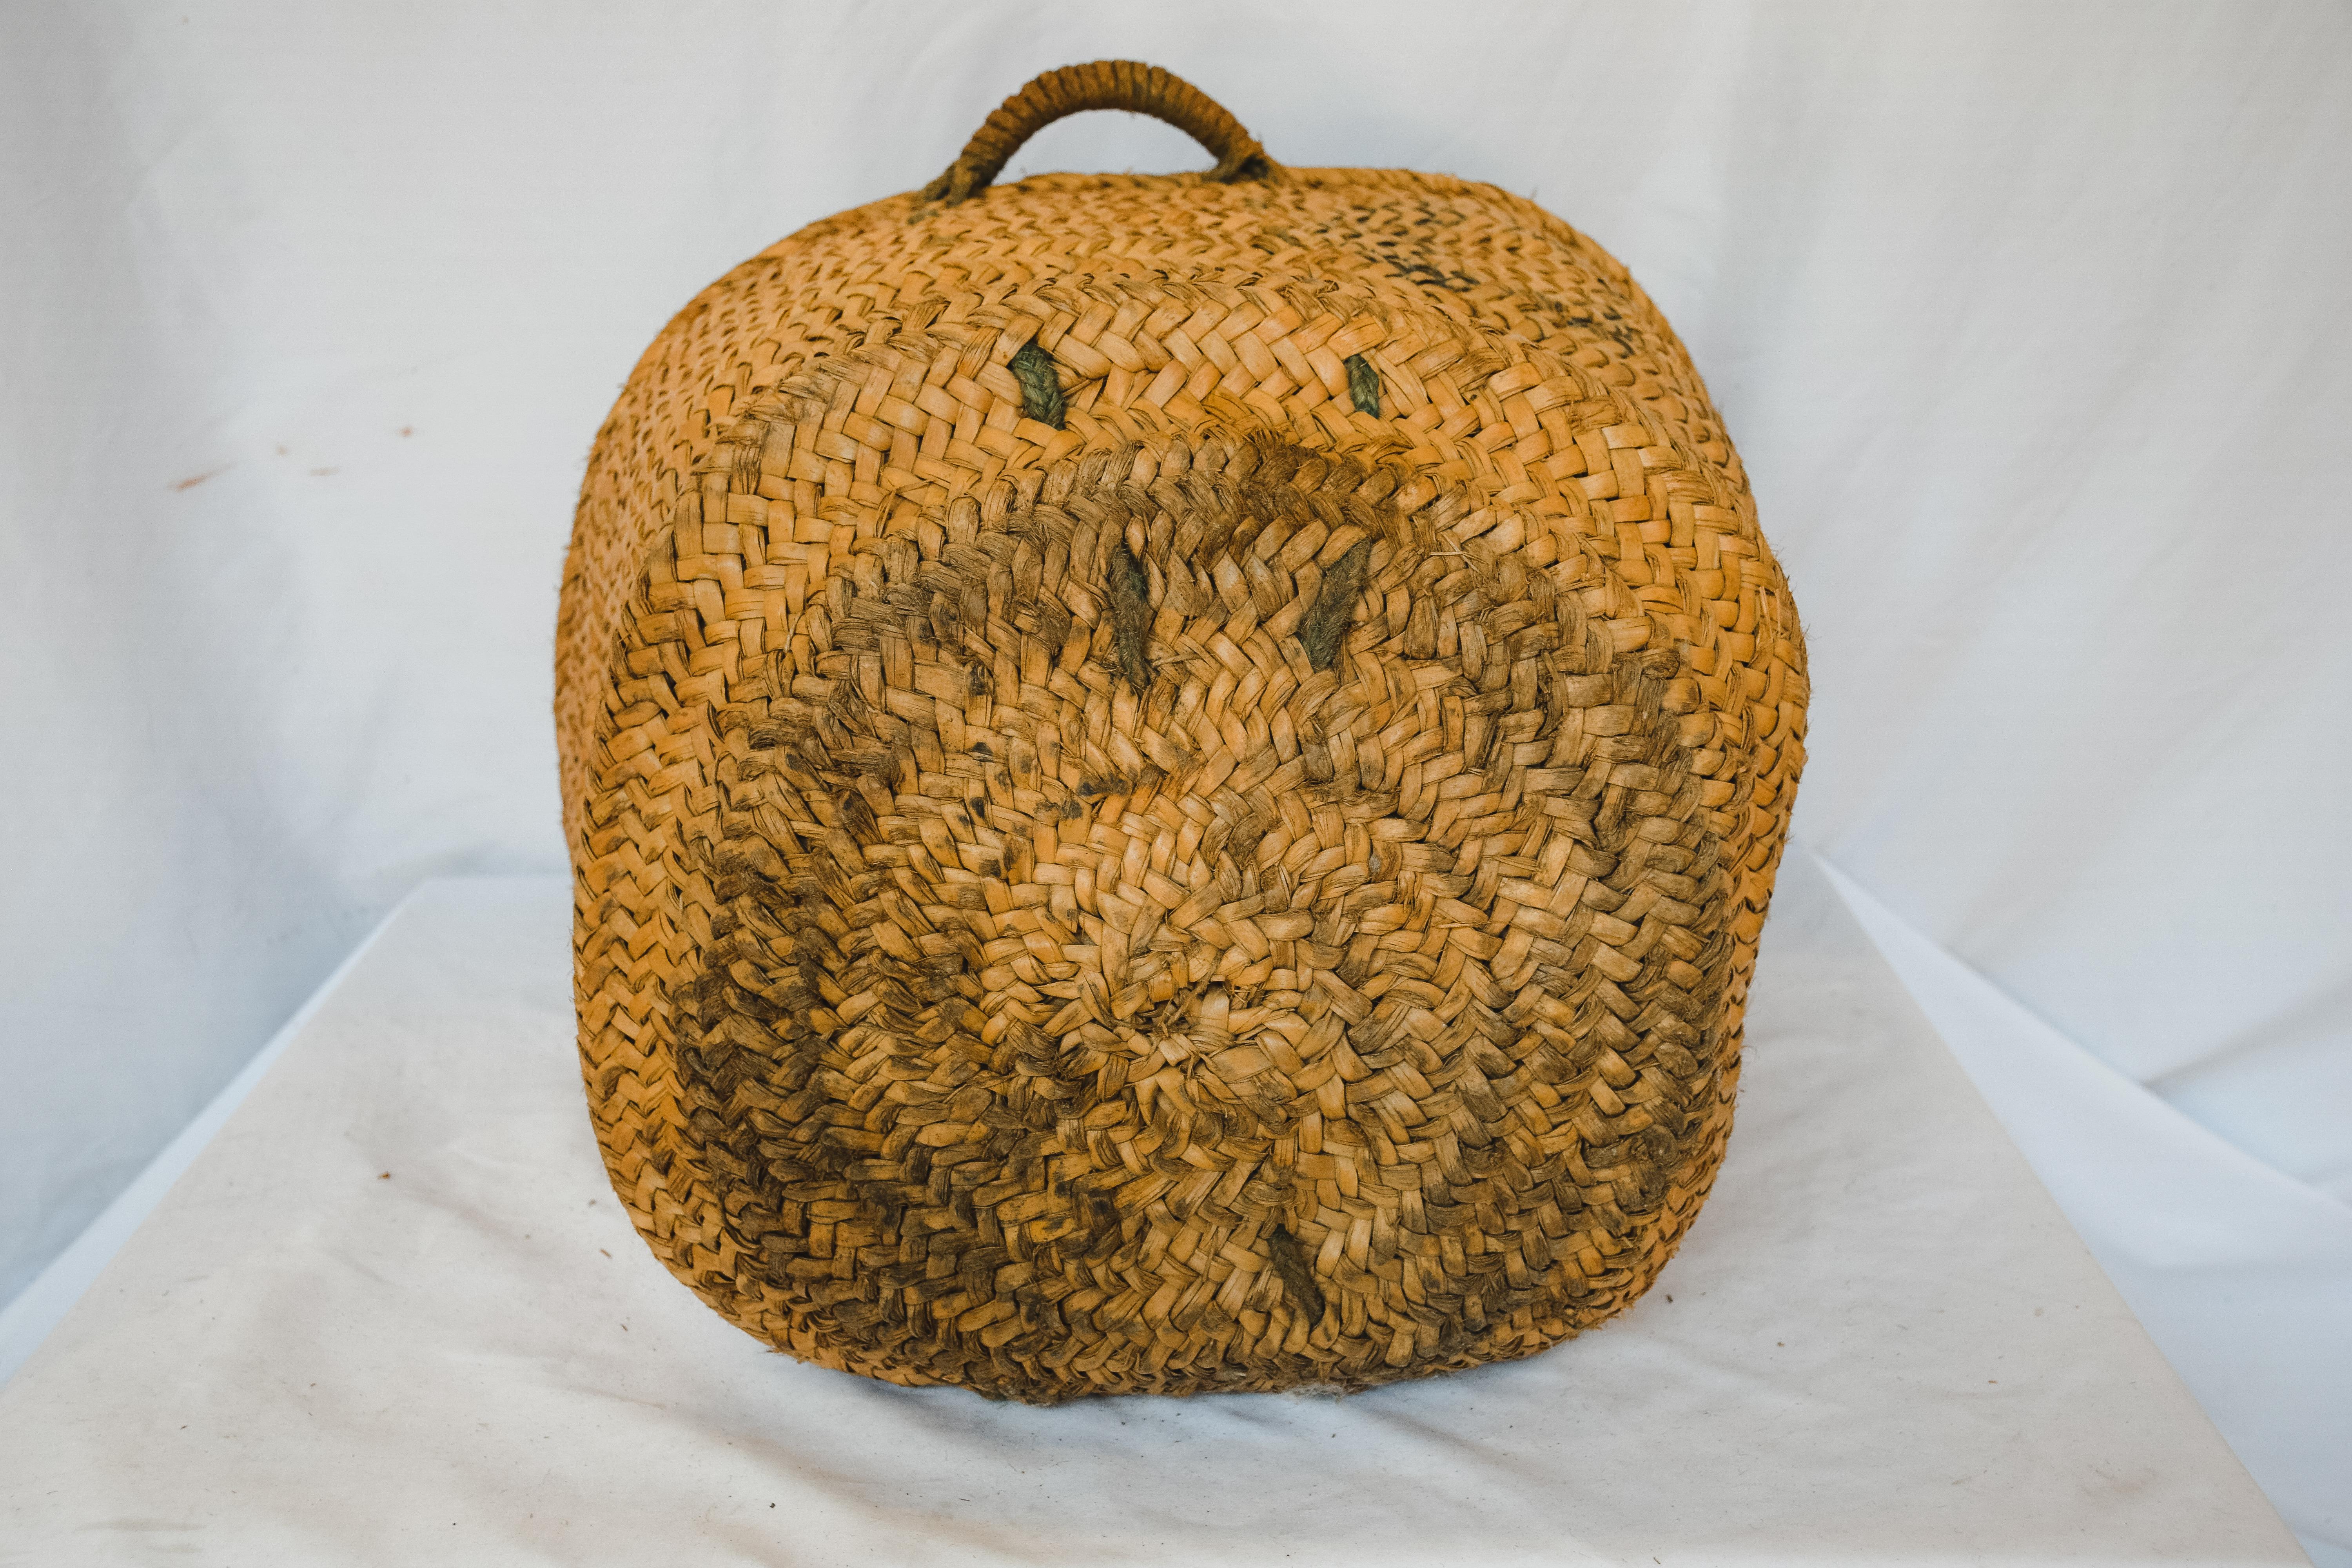 This is a beautifully weaved rustic French farm basket. The farm baskets were used in the open market places in France to display flowers, vegetables, fruits and bread goods. These baskets are not only beautiful, but they are very useful. Imagine